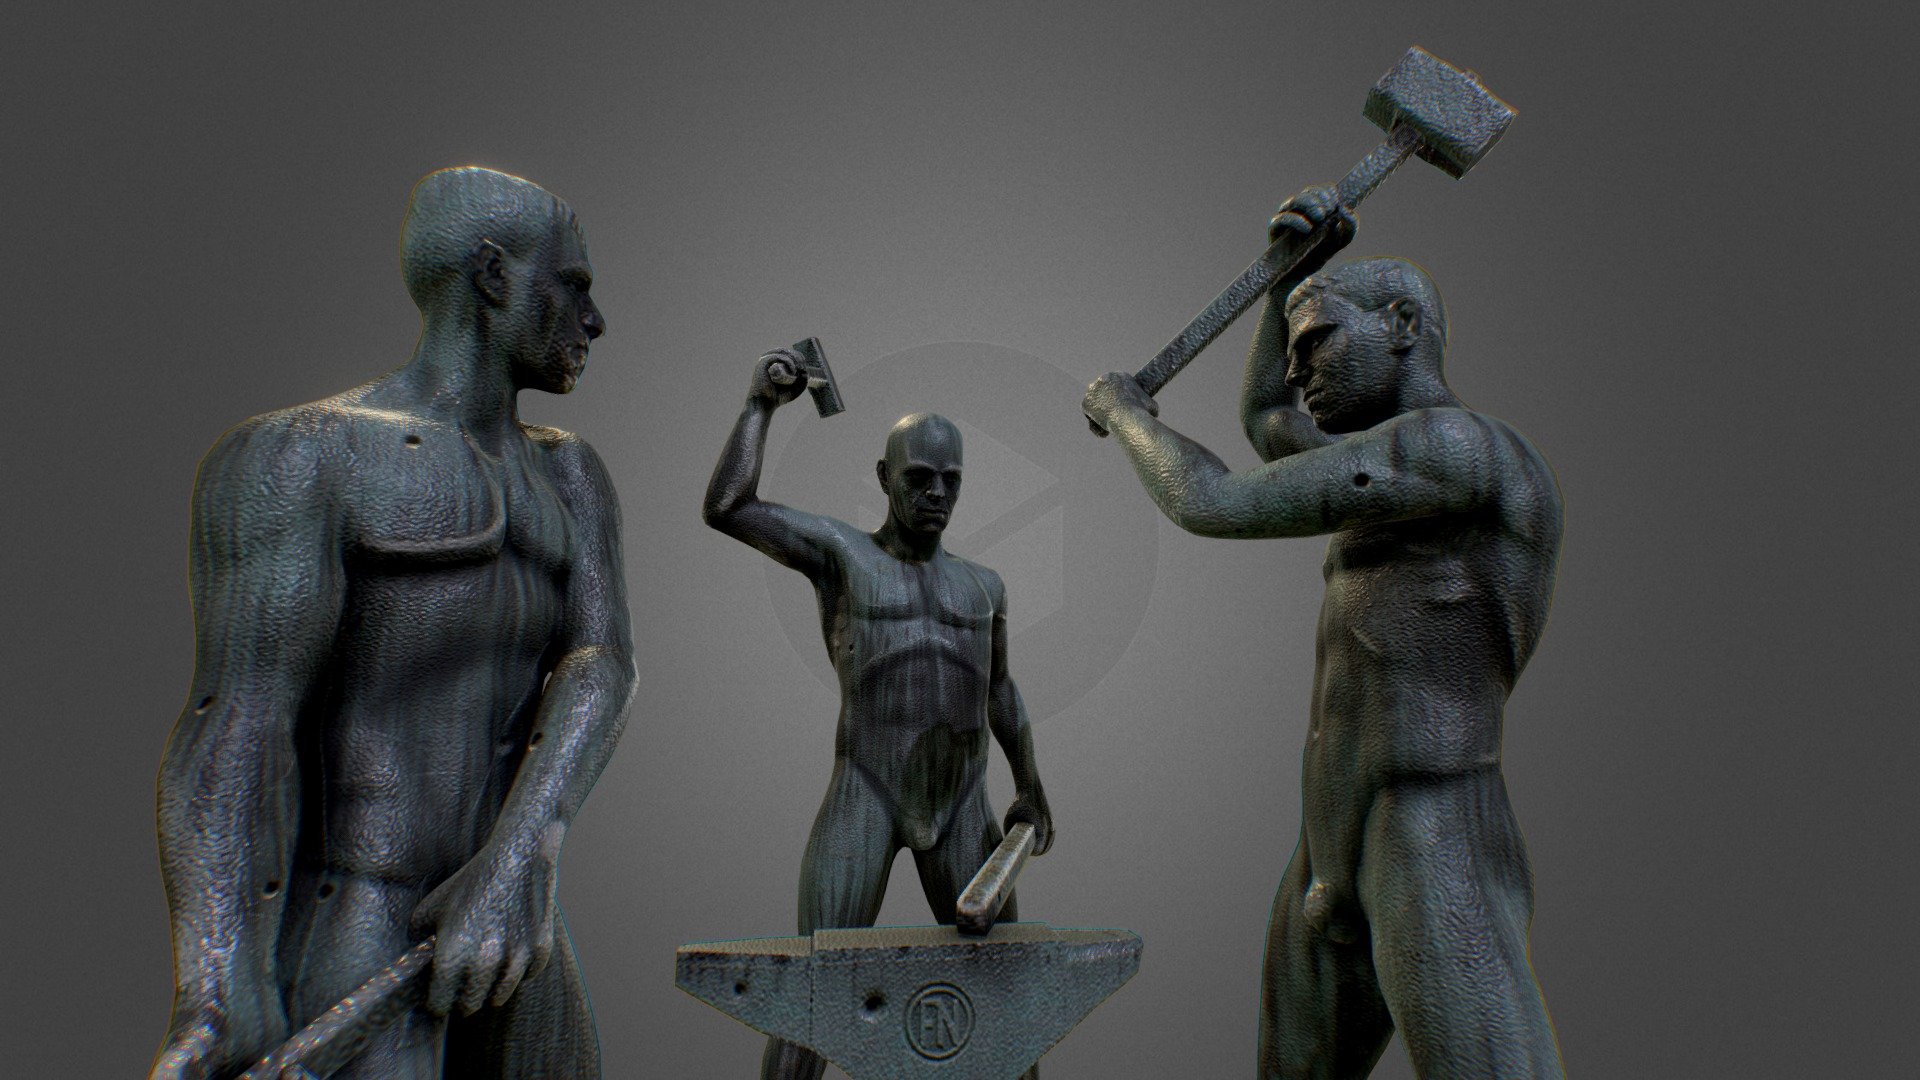 The Three Smiths Statue is a sculpture by Felix Nylund, situated in Helsinki in Three Smiths Square at the intersection of Aleksanterinkatu and Mannerheimintie. This realistic statue, unveiled in 1932, depicts three smiths hammering on an anvil.

The Three Smiths Statue is a popular meeting place, the Green League has often located their election campaign quarters next to it and a Peruvian street music orchestra has performed in the area on many summers.

The digital model is a part of our project Helsinki2020 and was modelled by the 3D artist Marcelo Prado 3d model